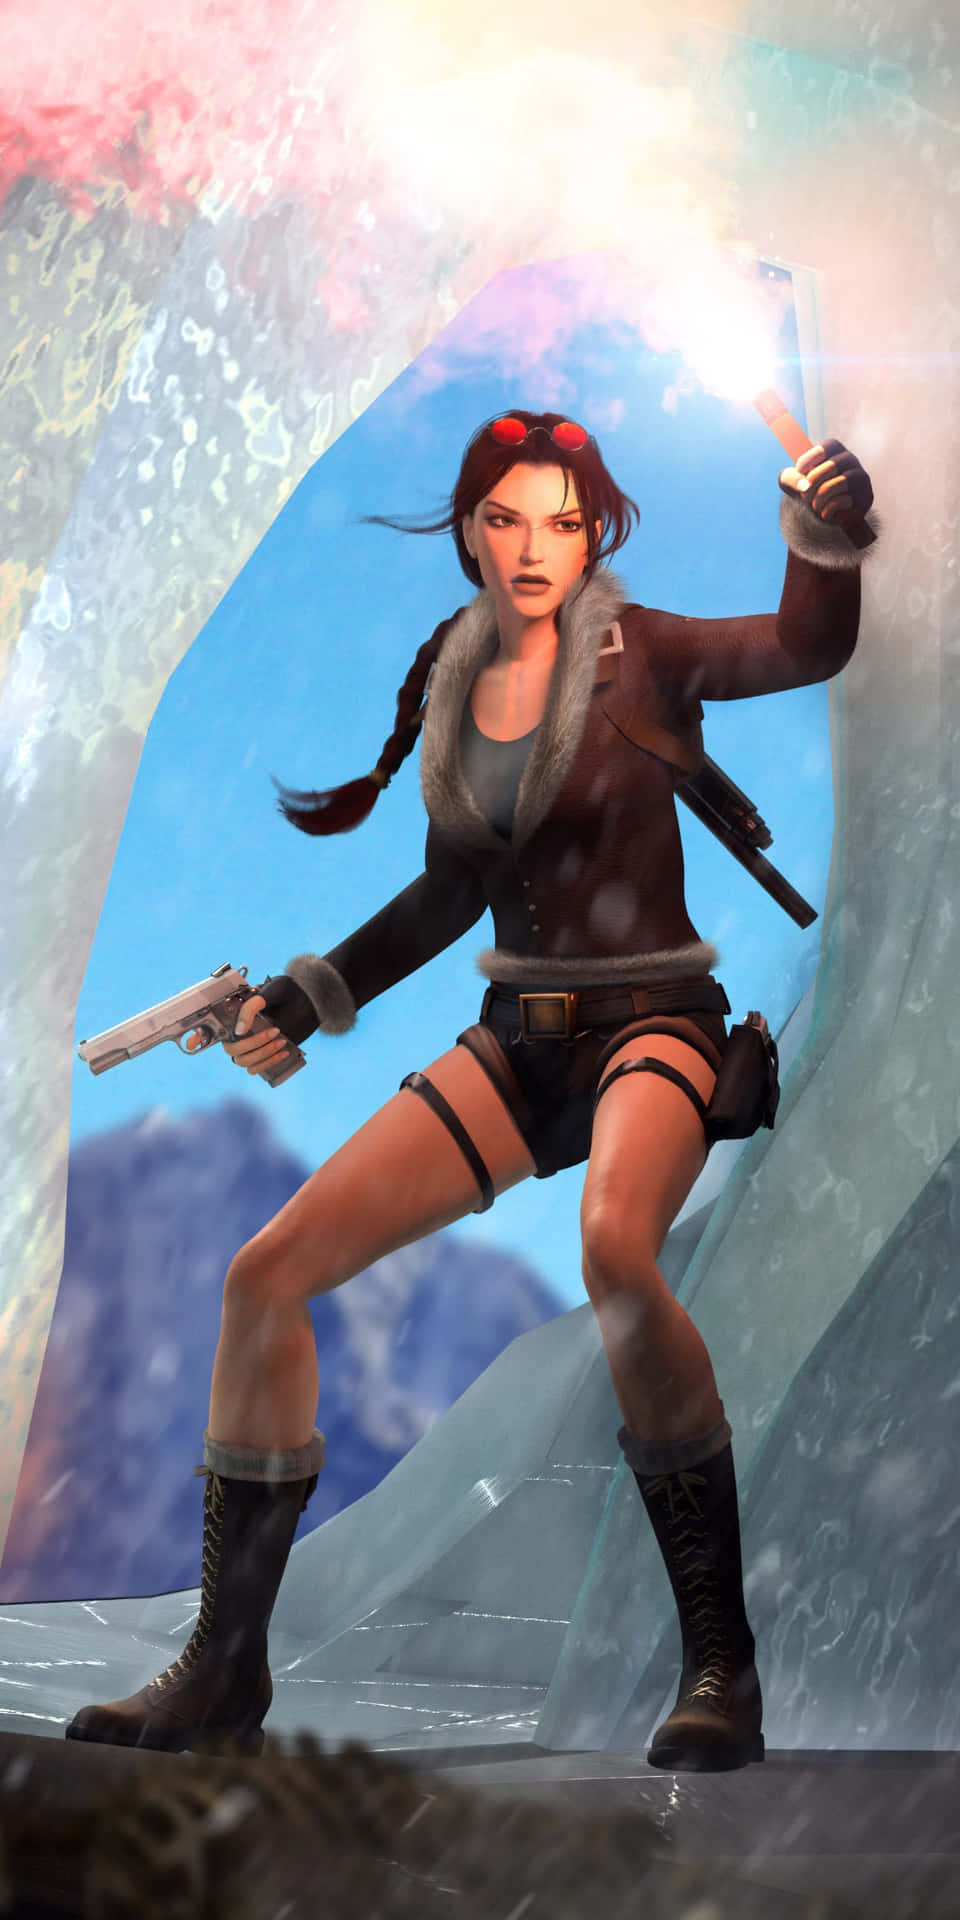 Androidbakgrund Rise Of The Tomb Raider Fackla.